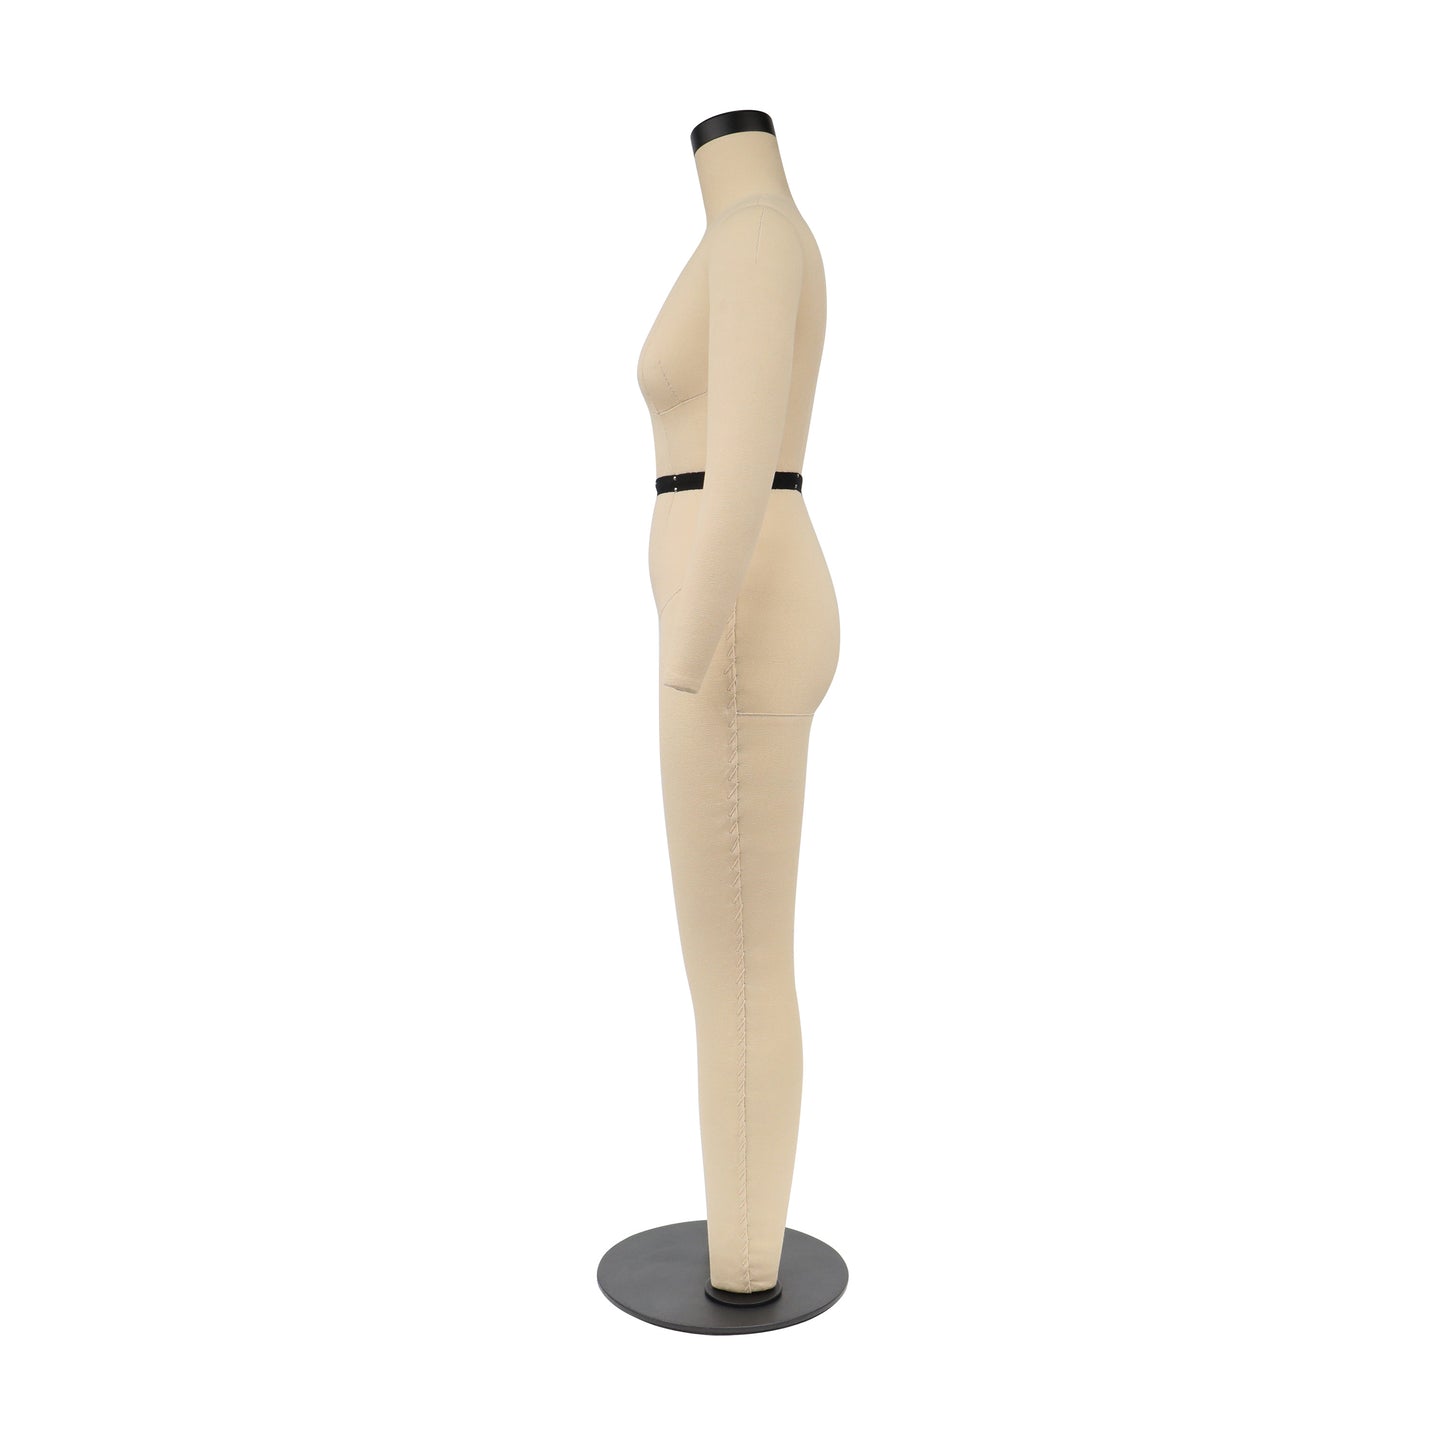 DL265 Half Scale dress form full body, US size 6 1/2 scale tailoring dummy,Sewing Dressmaker Mannequin with Detachable Arms